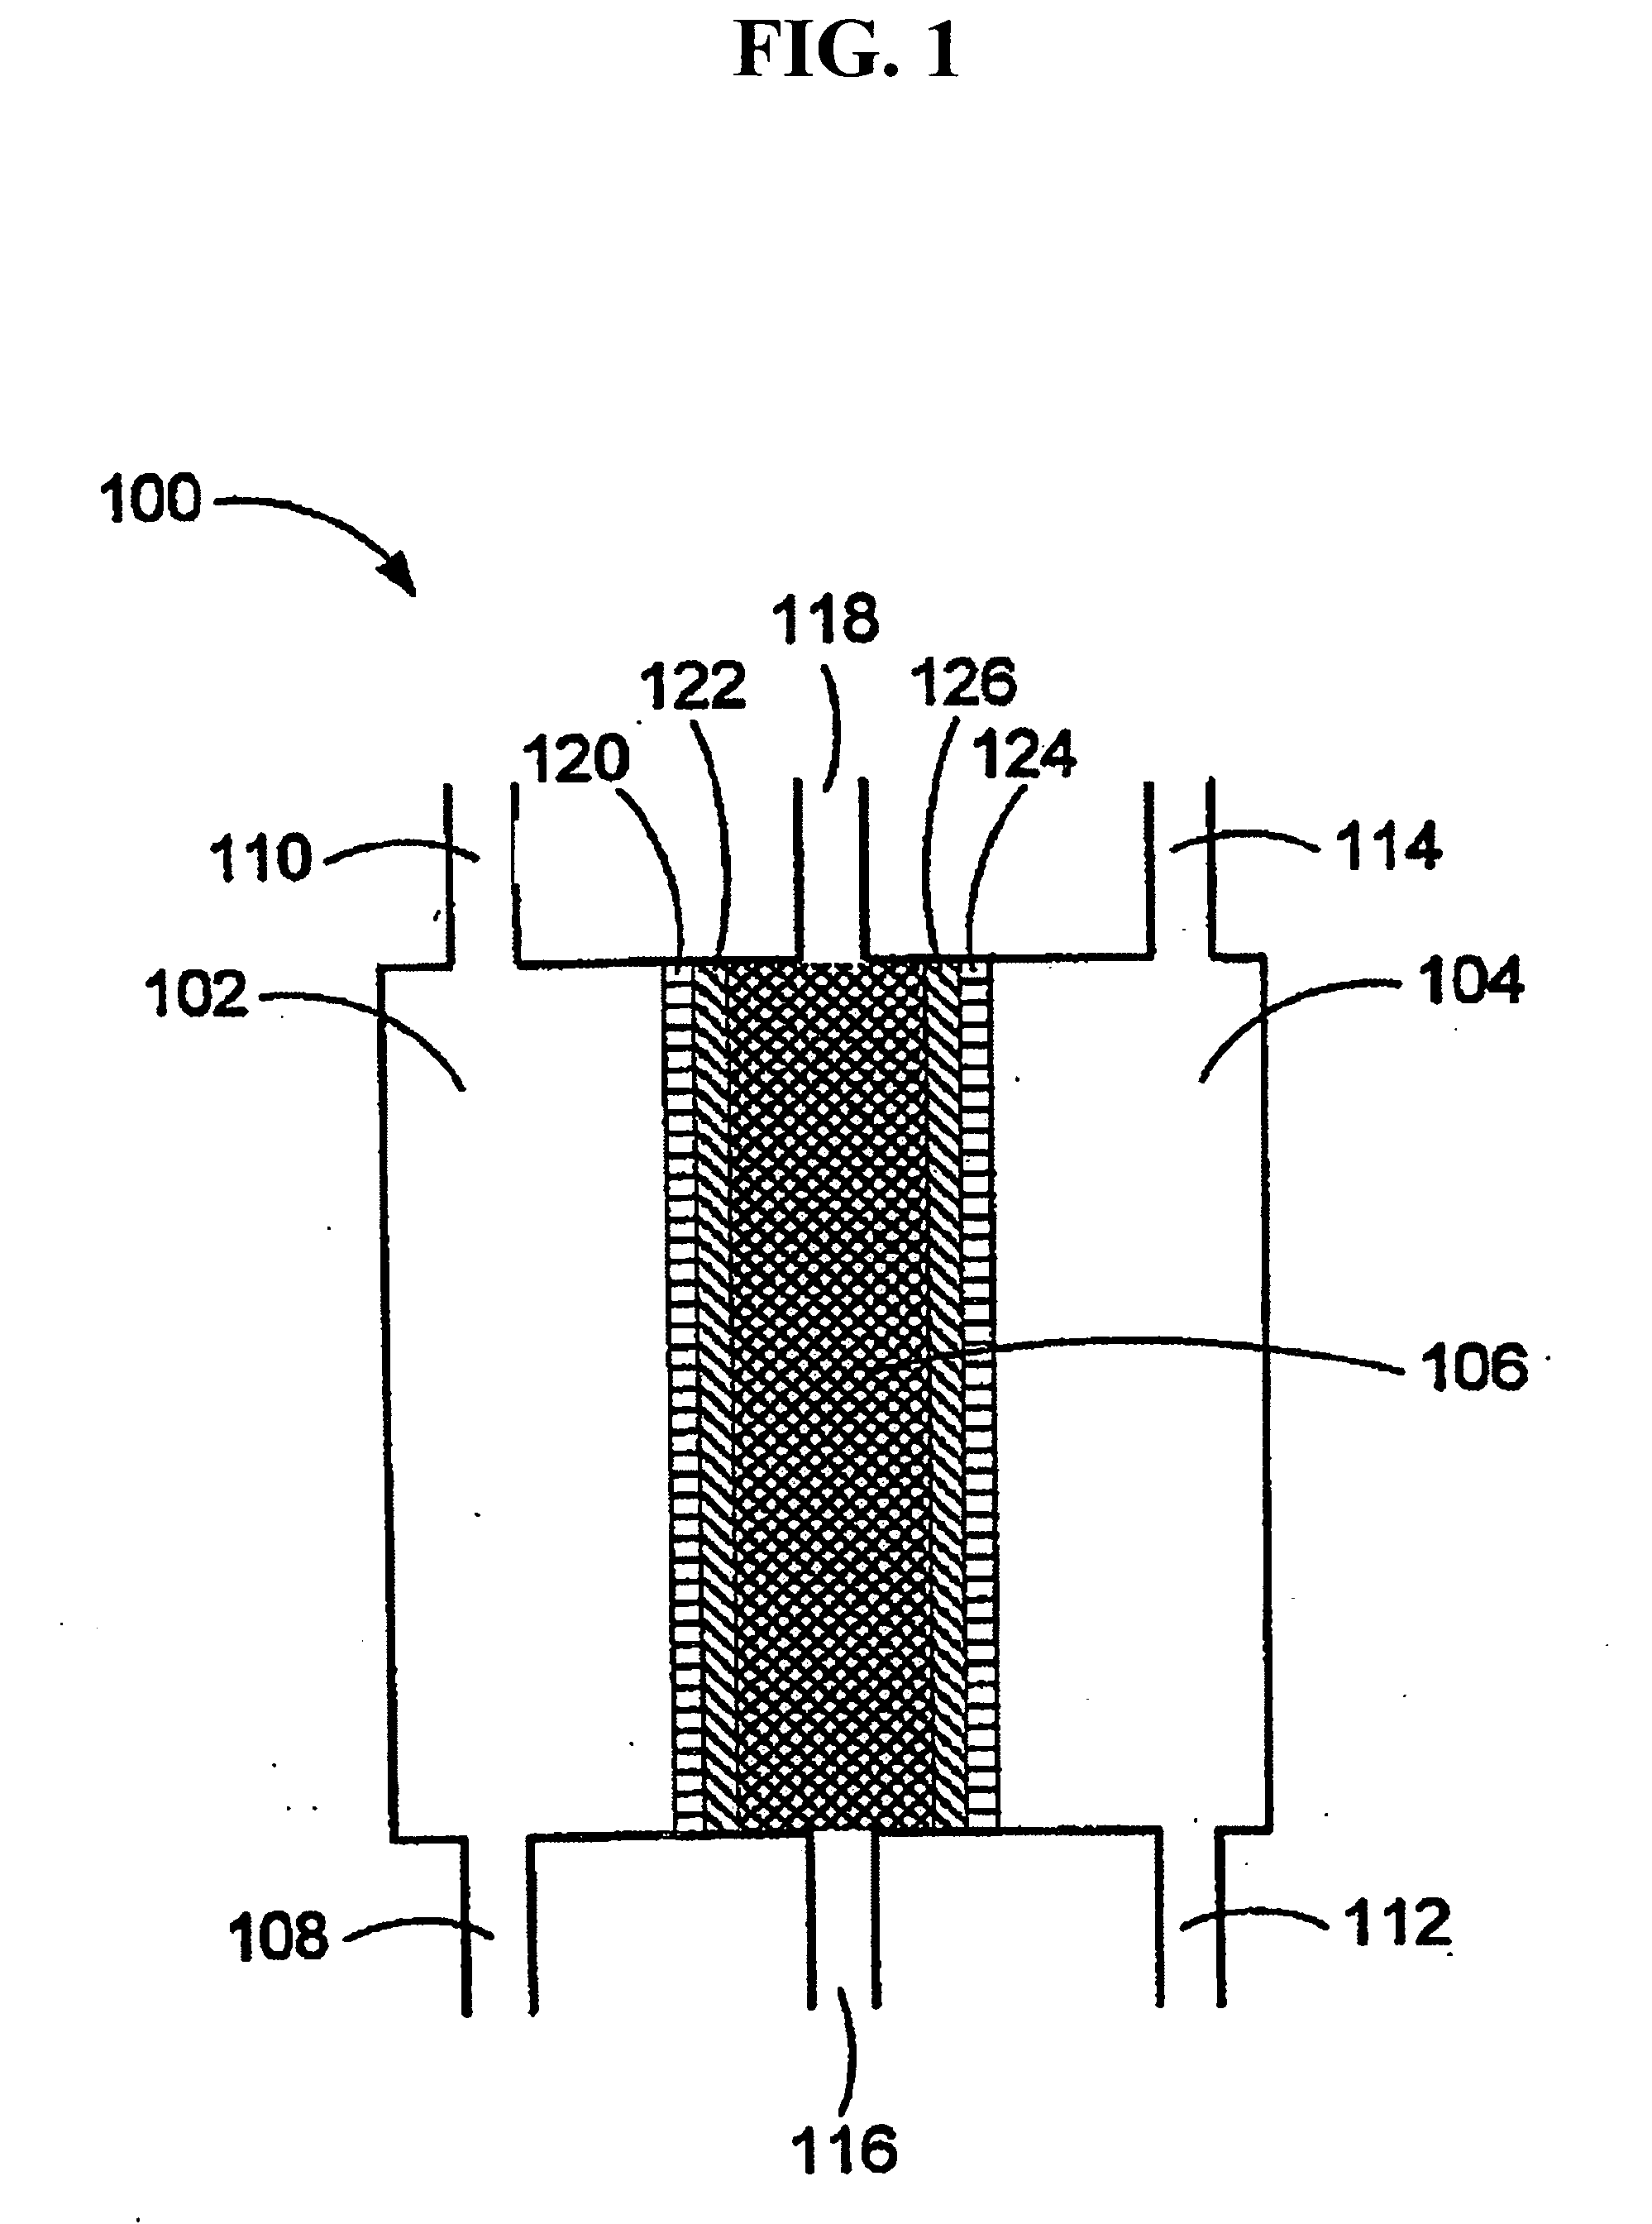 Methods of treating or preventing peritonitis with oxidative reductive potential water solution